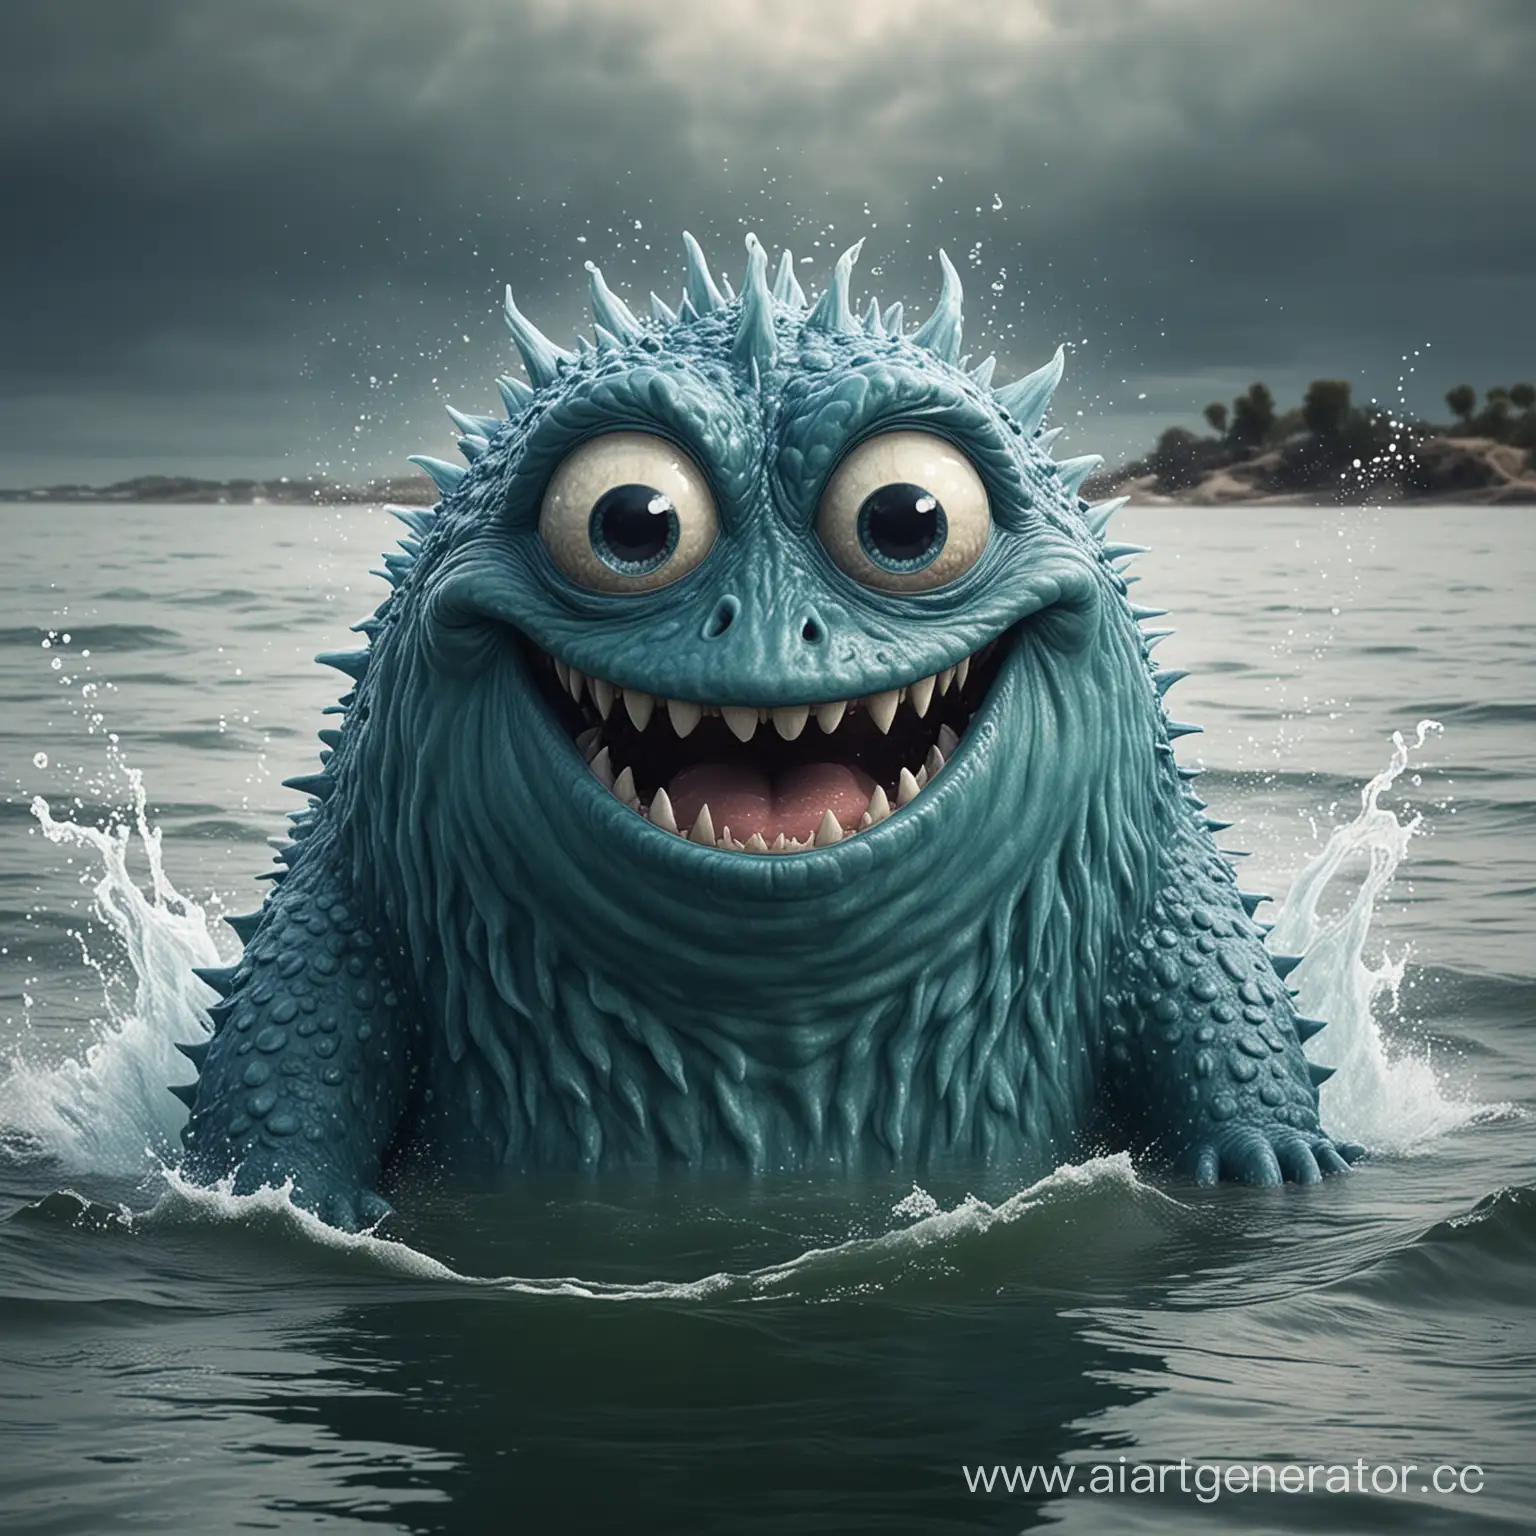 Grinning-Water-Monster-Emerges-from-Depths